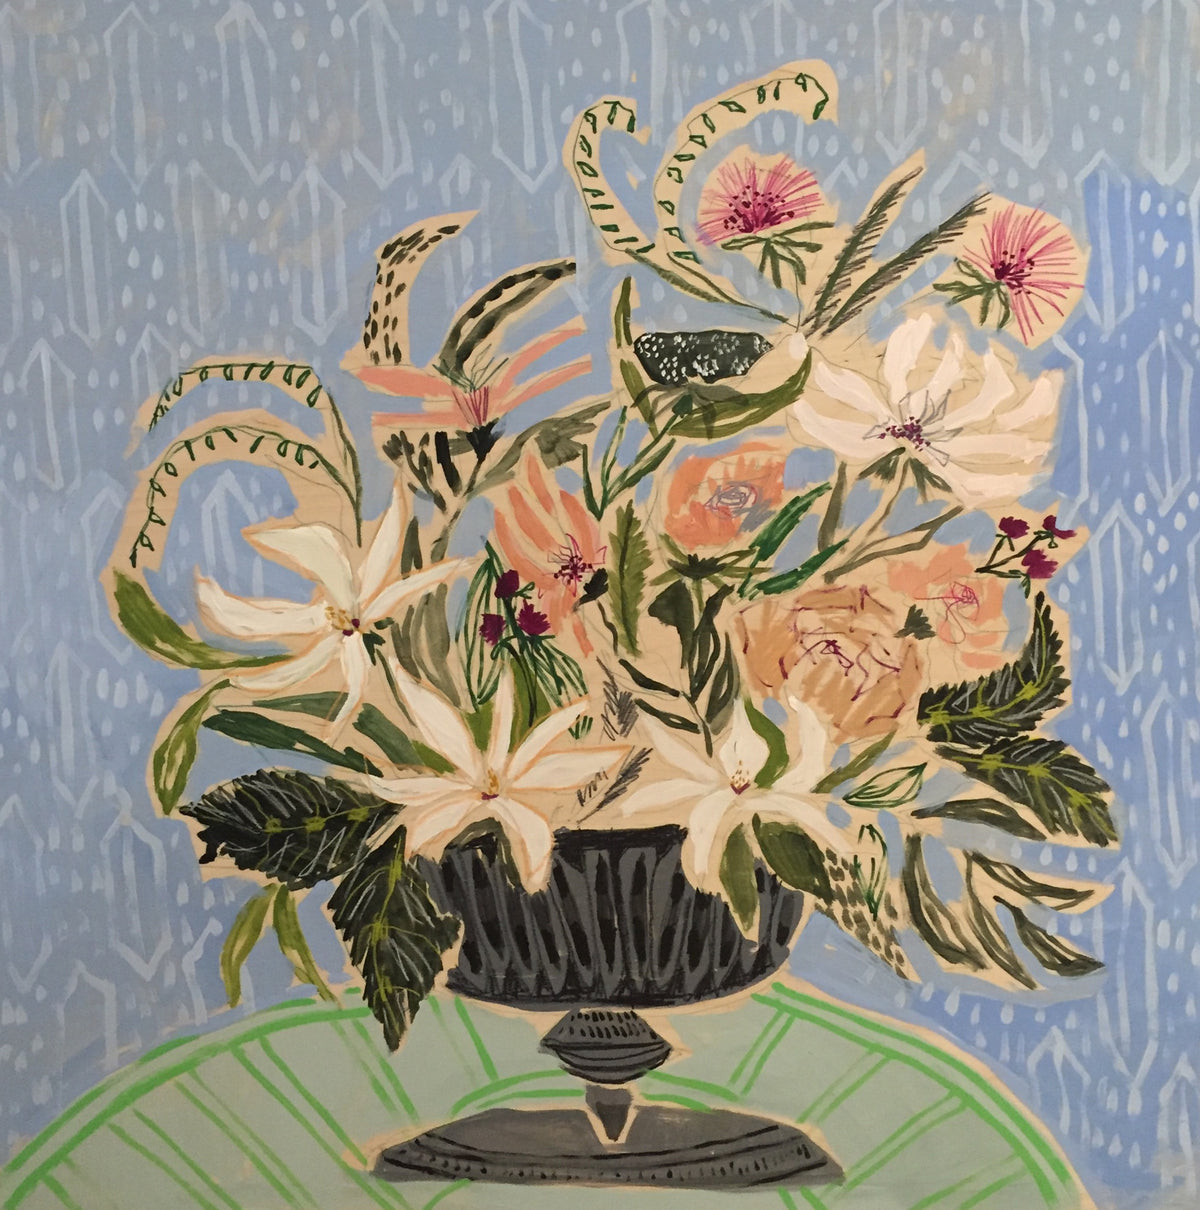 FLOWERS FOR EVELYN - 36x36